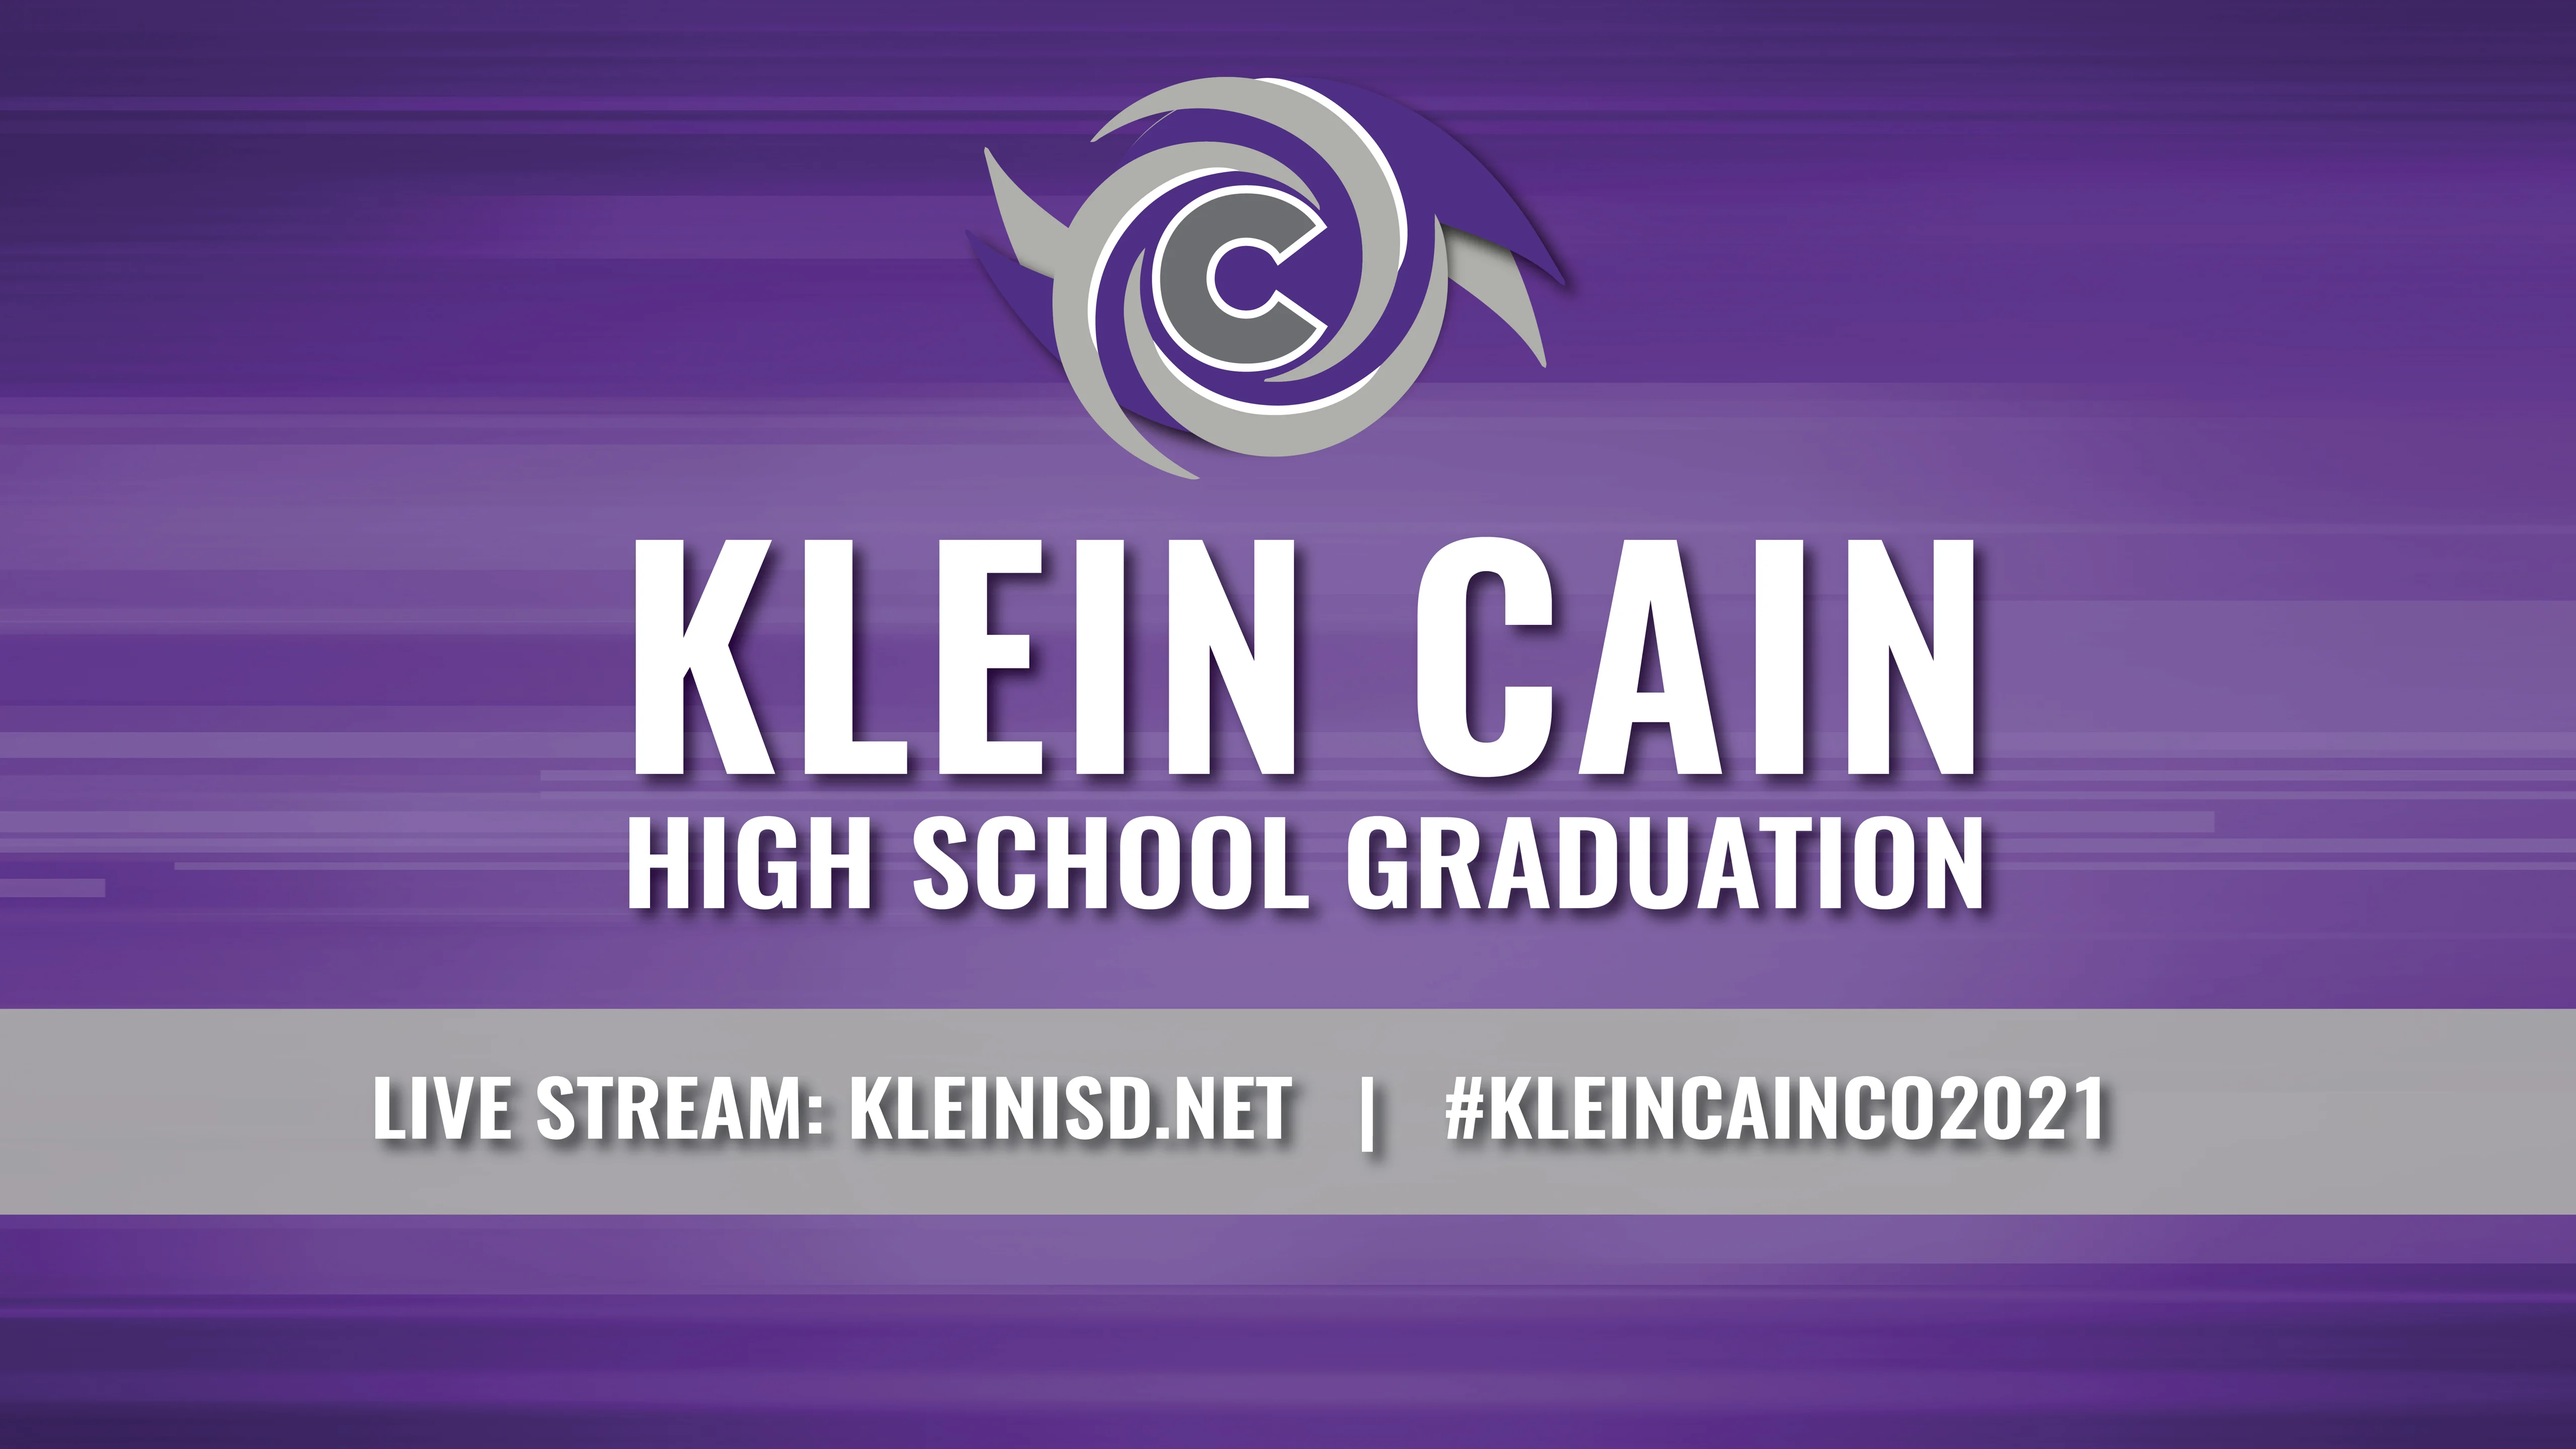 What you need to know before attending Klein ISD's 2021 graduation  ceremonies